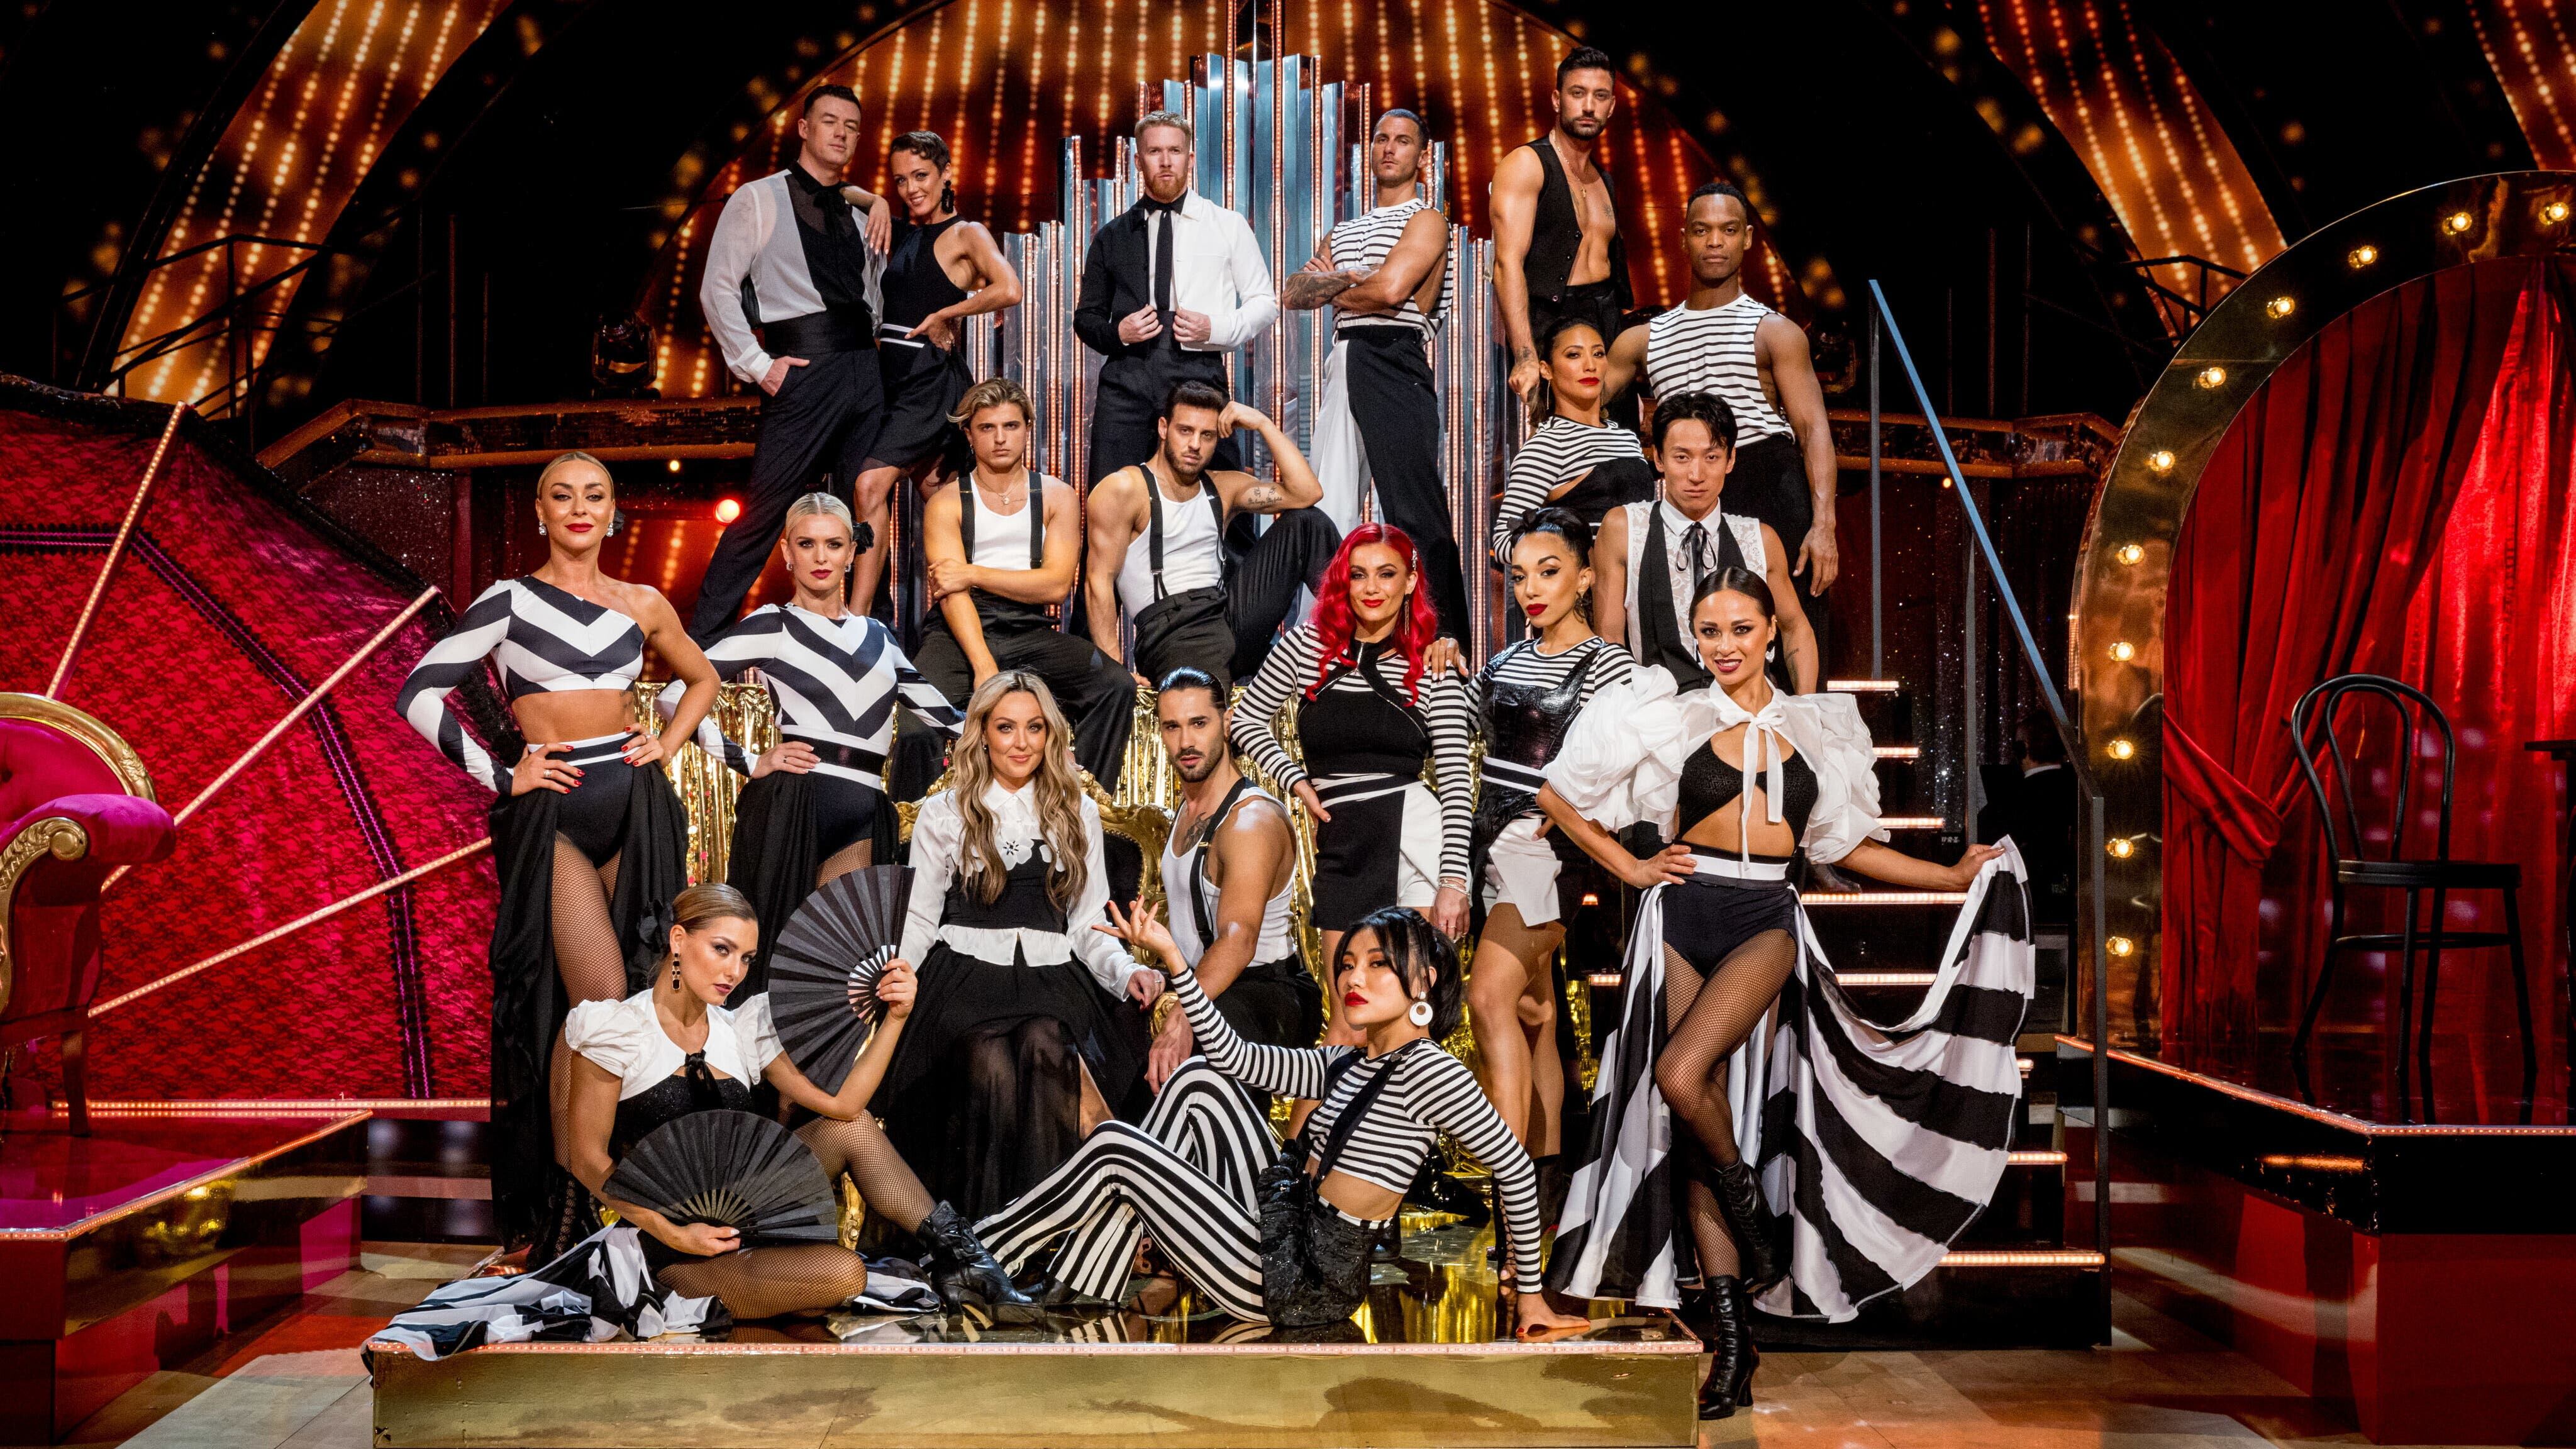 Strictly Come Dancing is set to welcome a new batch of famous faces to its dazzling dancefloor as the hit BBC show returns to screens this weekend (Guy Levy/BBC/PA)